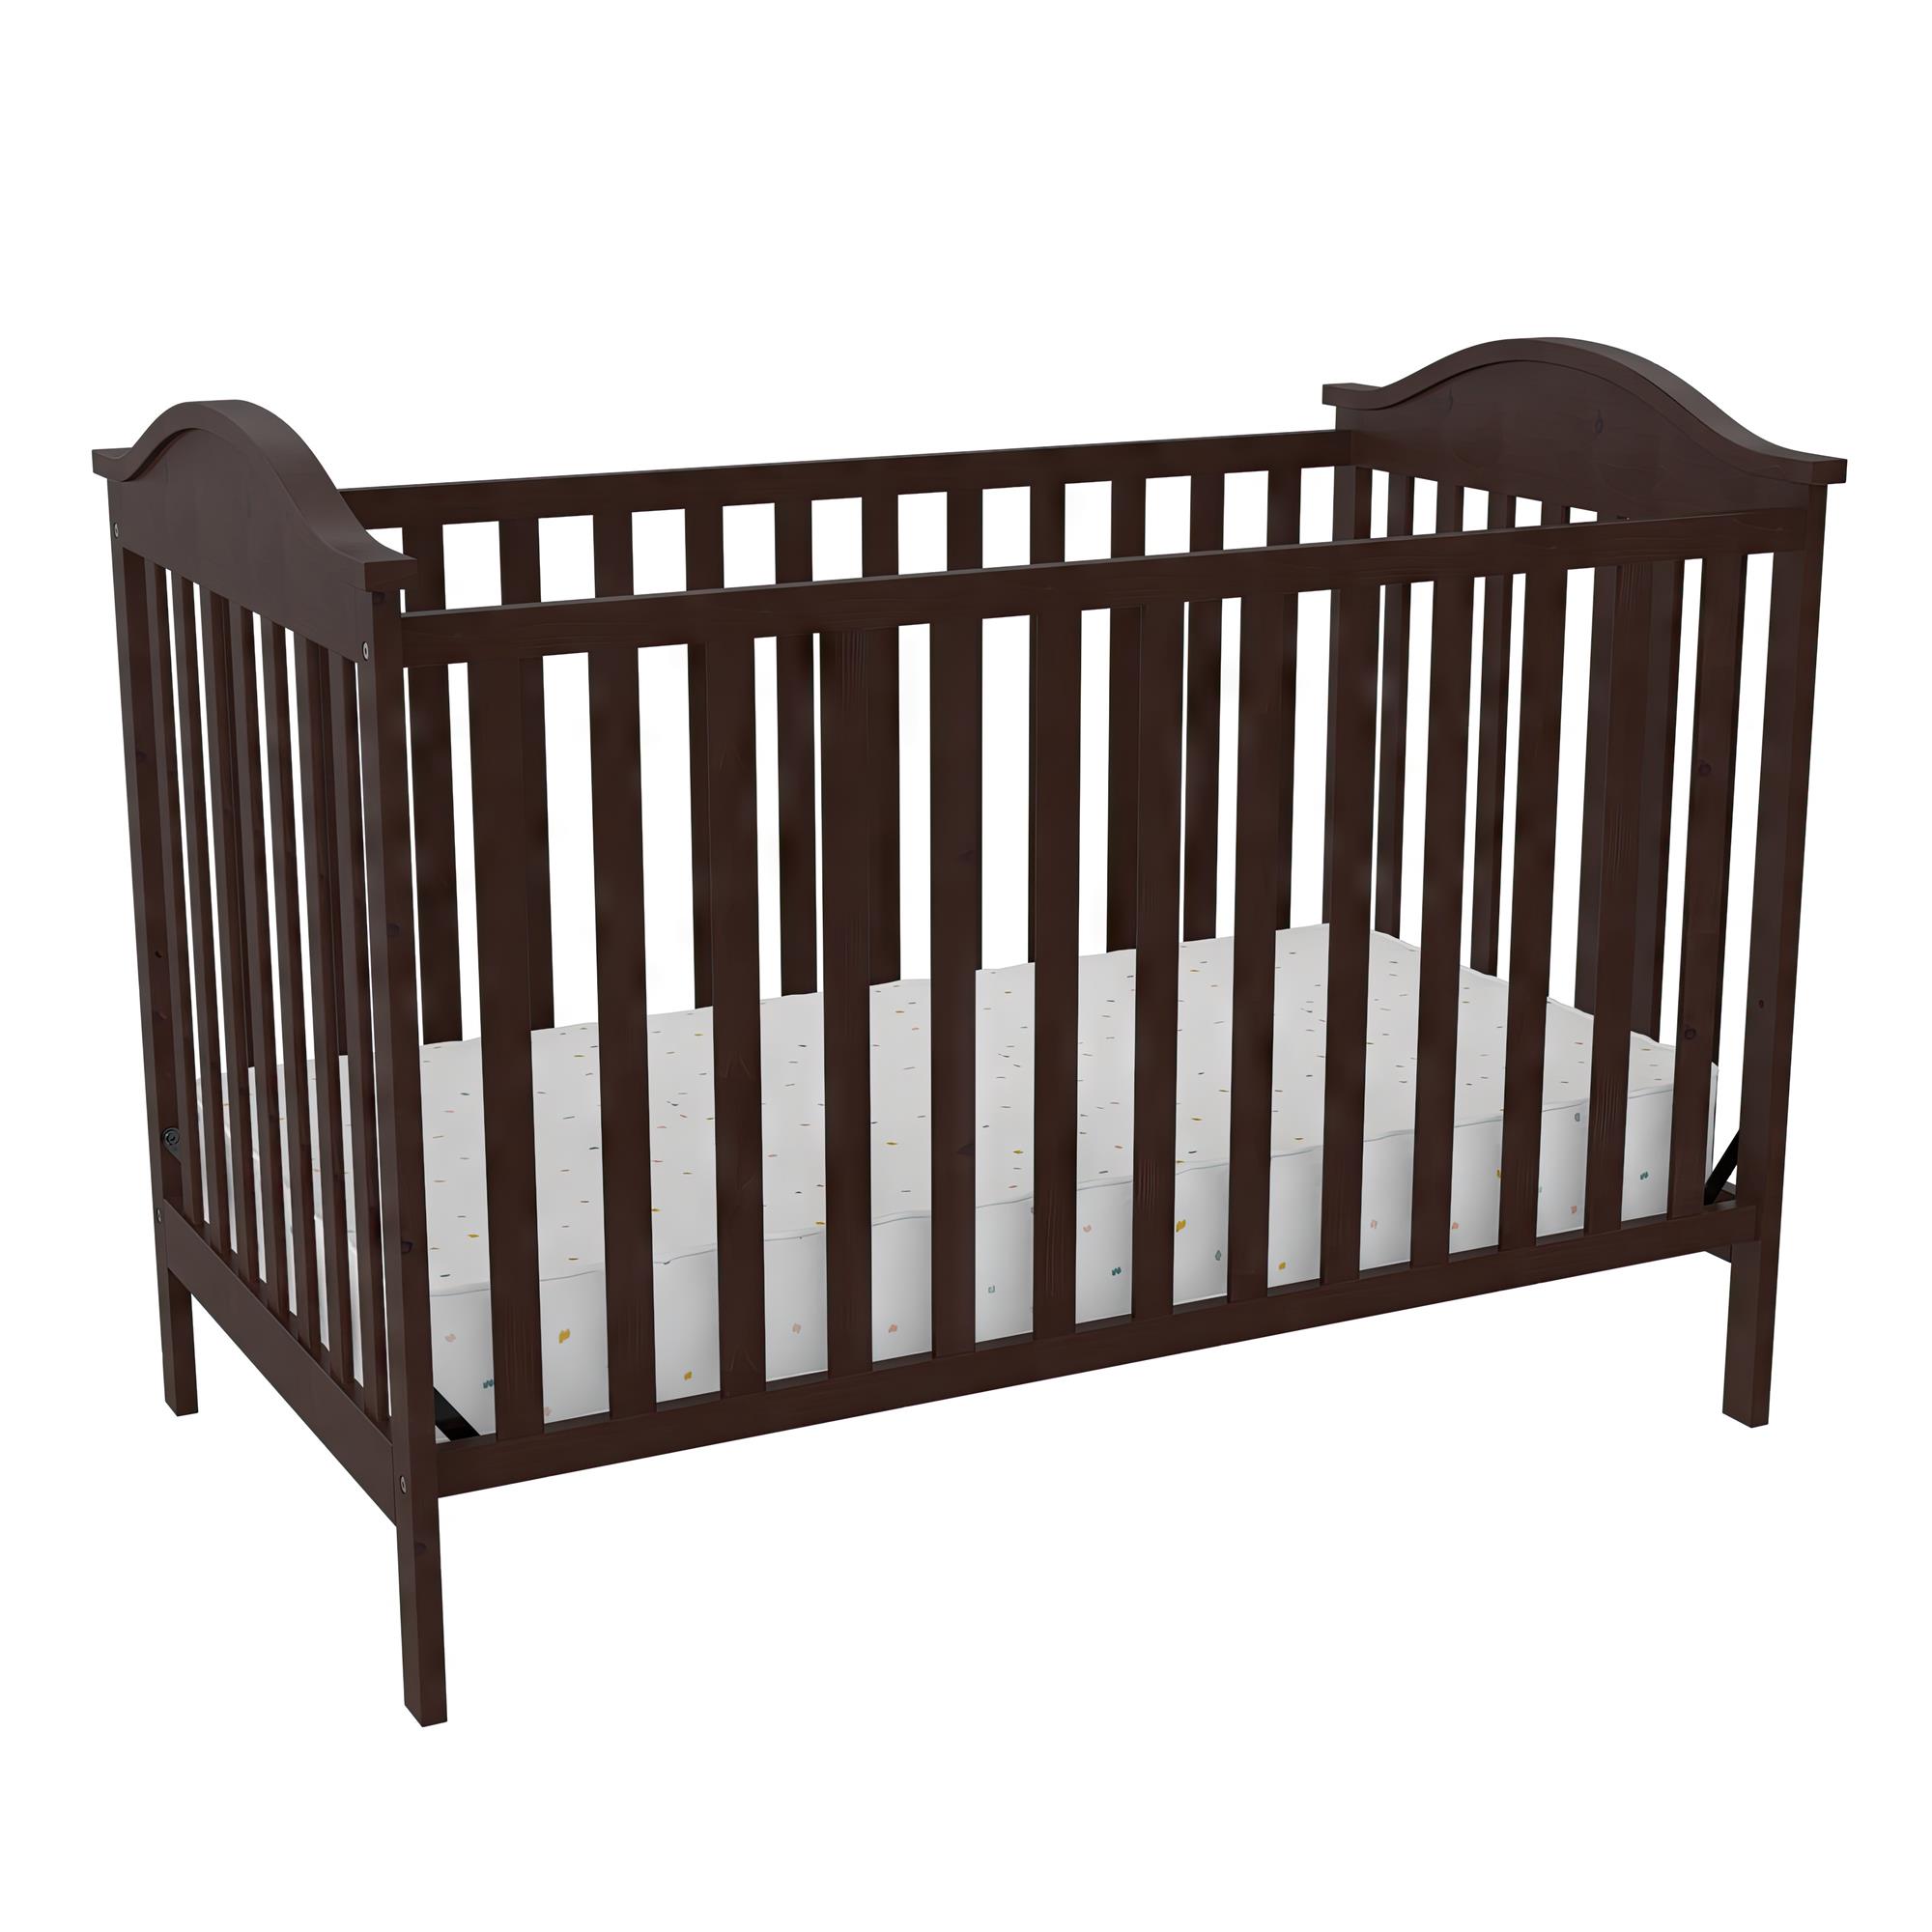 Baby Relax Adele 3-in-1 Convertible Crib, Espresso - image 3 of 13